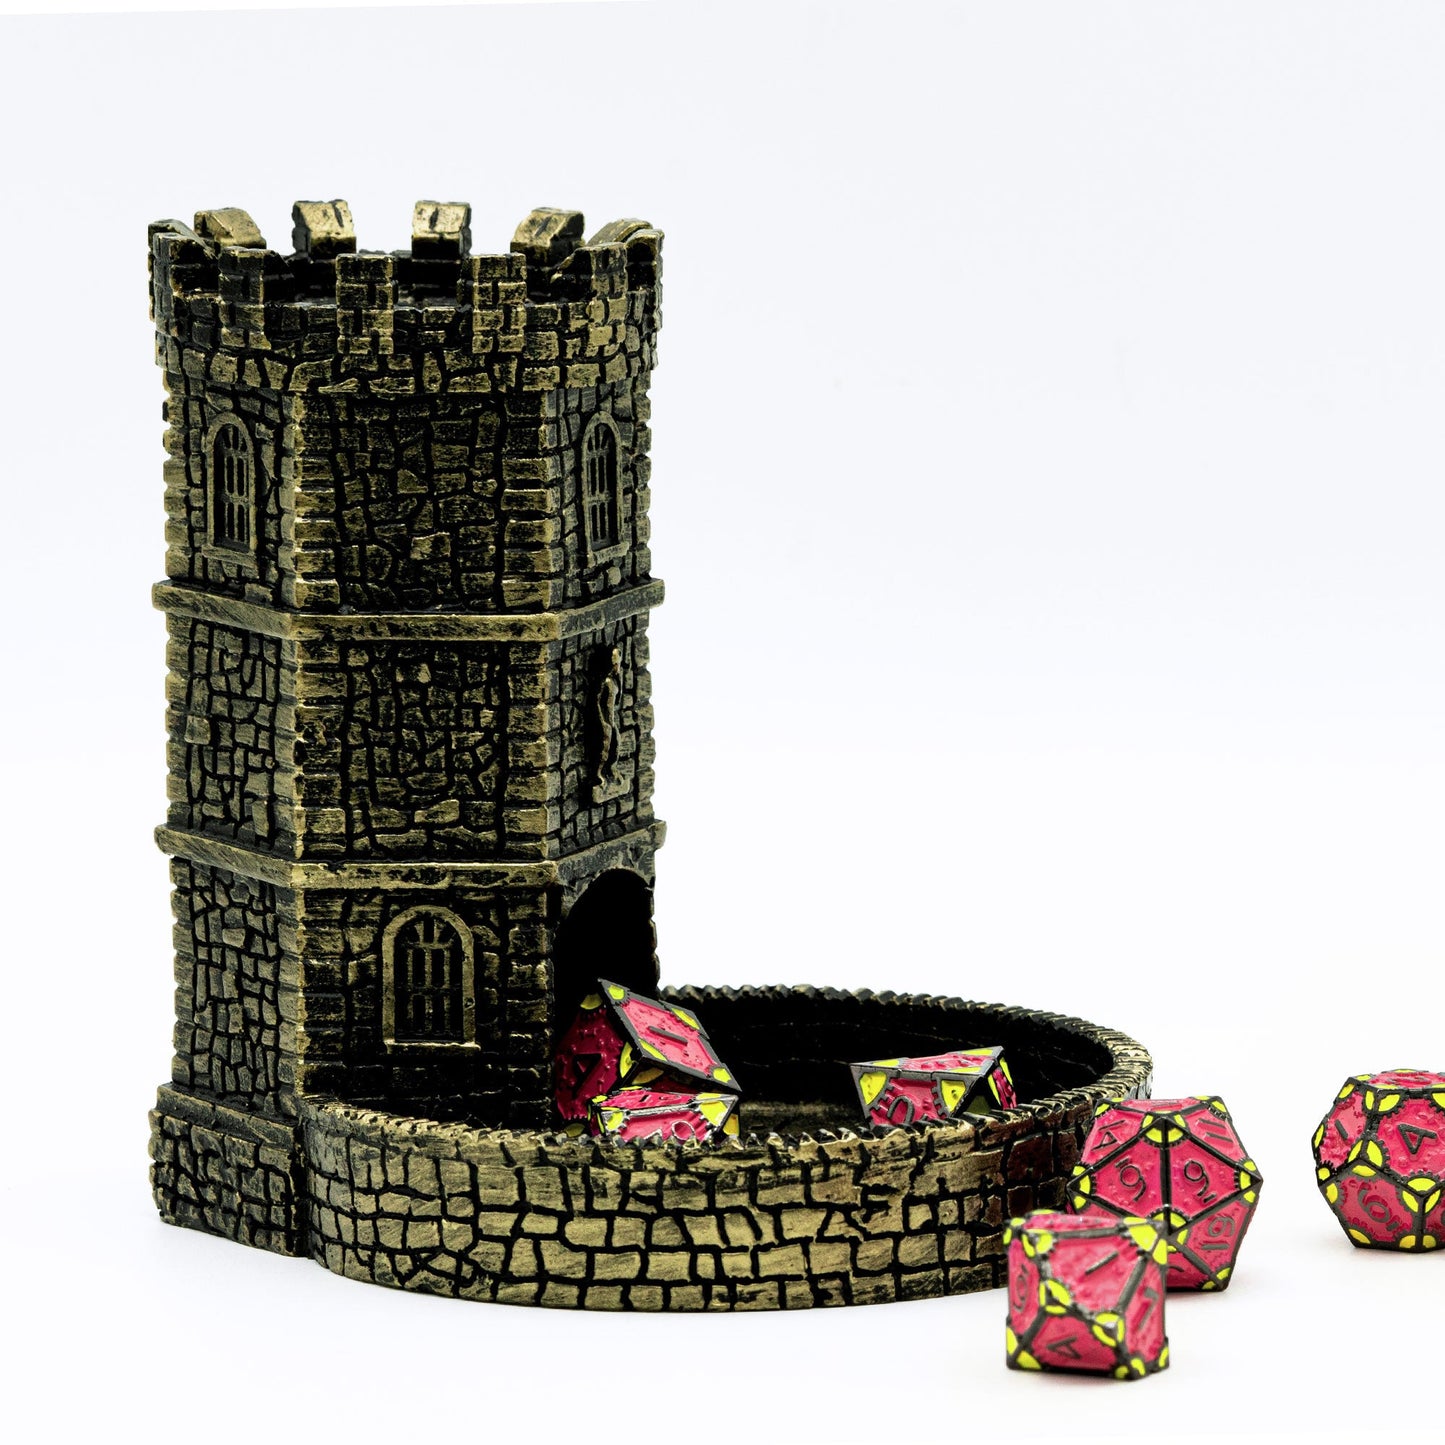 Bronze wizard dice tower with pink dice at base